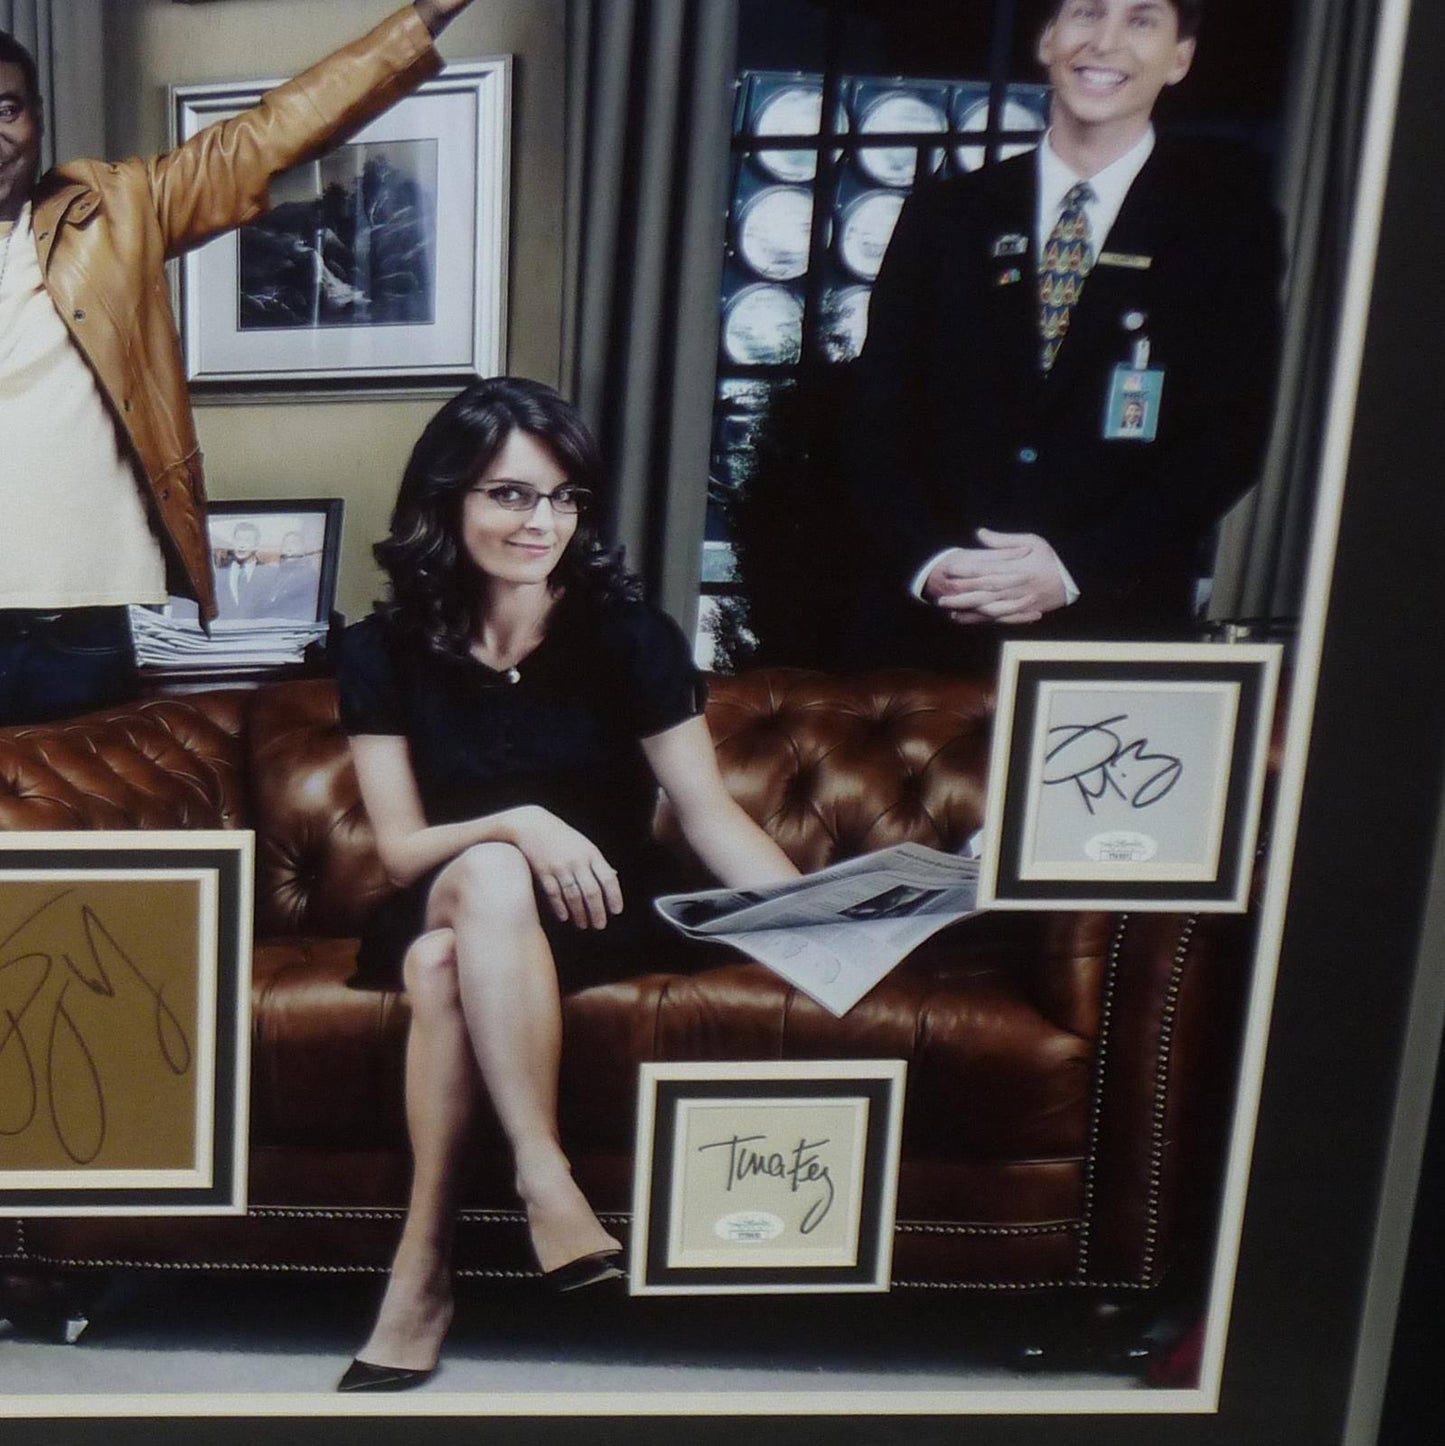 30 ROCK Full-Size TV Poster Deluxe Framed with All 5 Cast Autographs - JSA